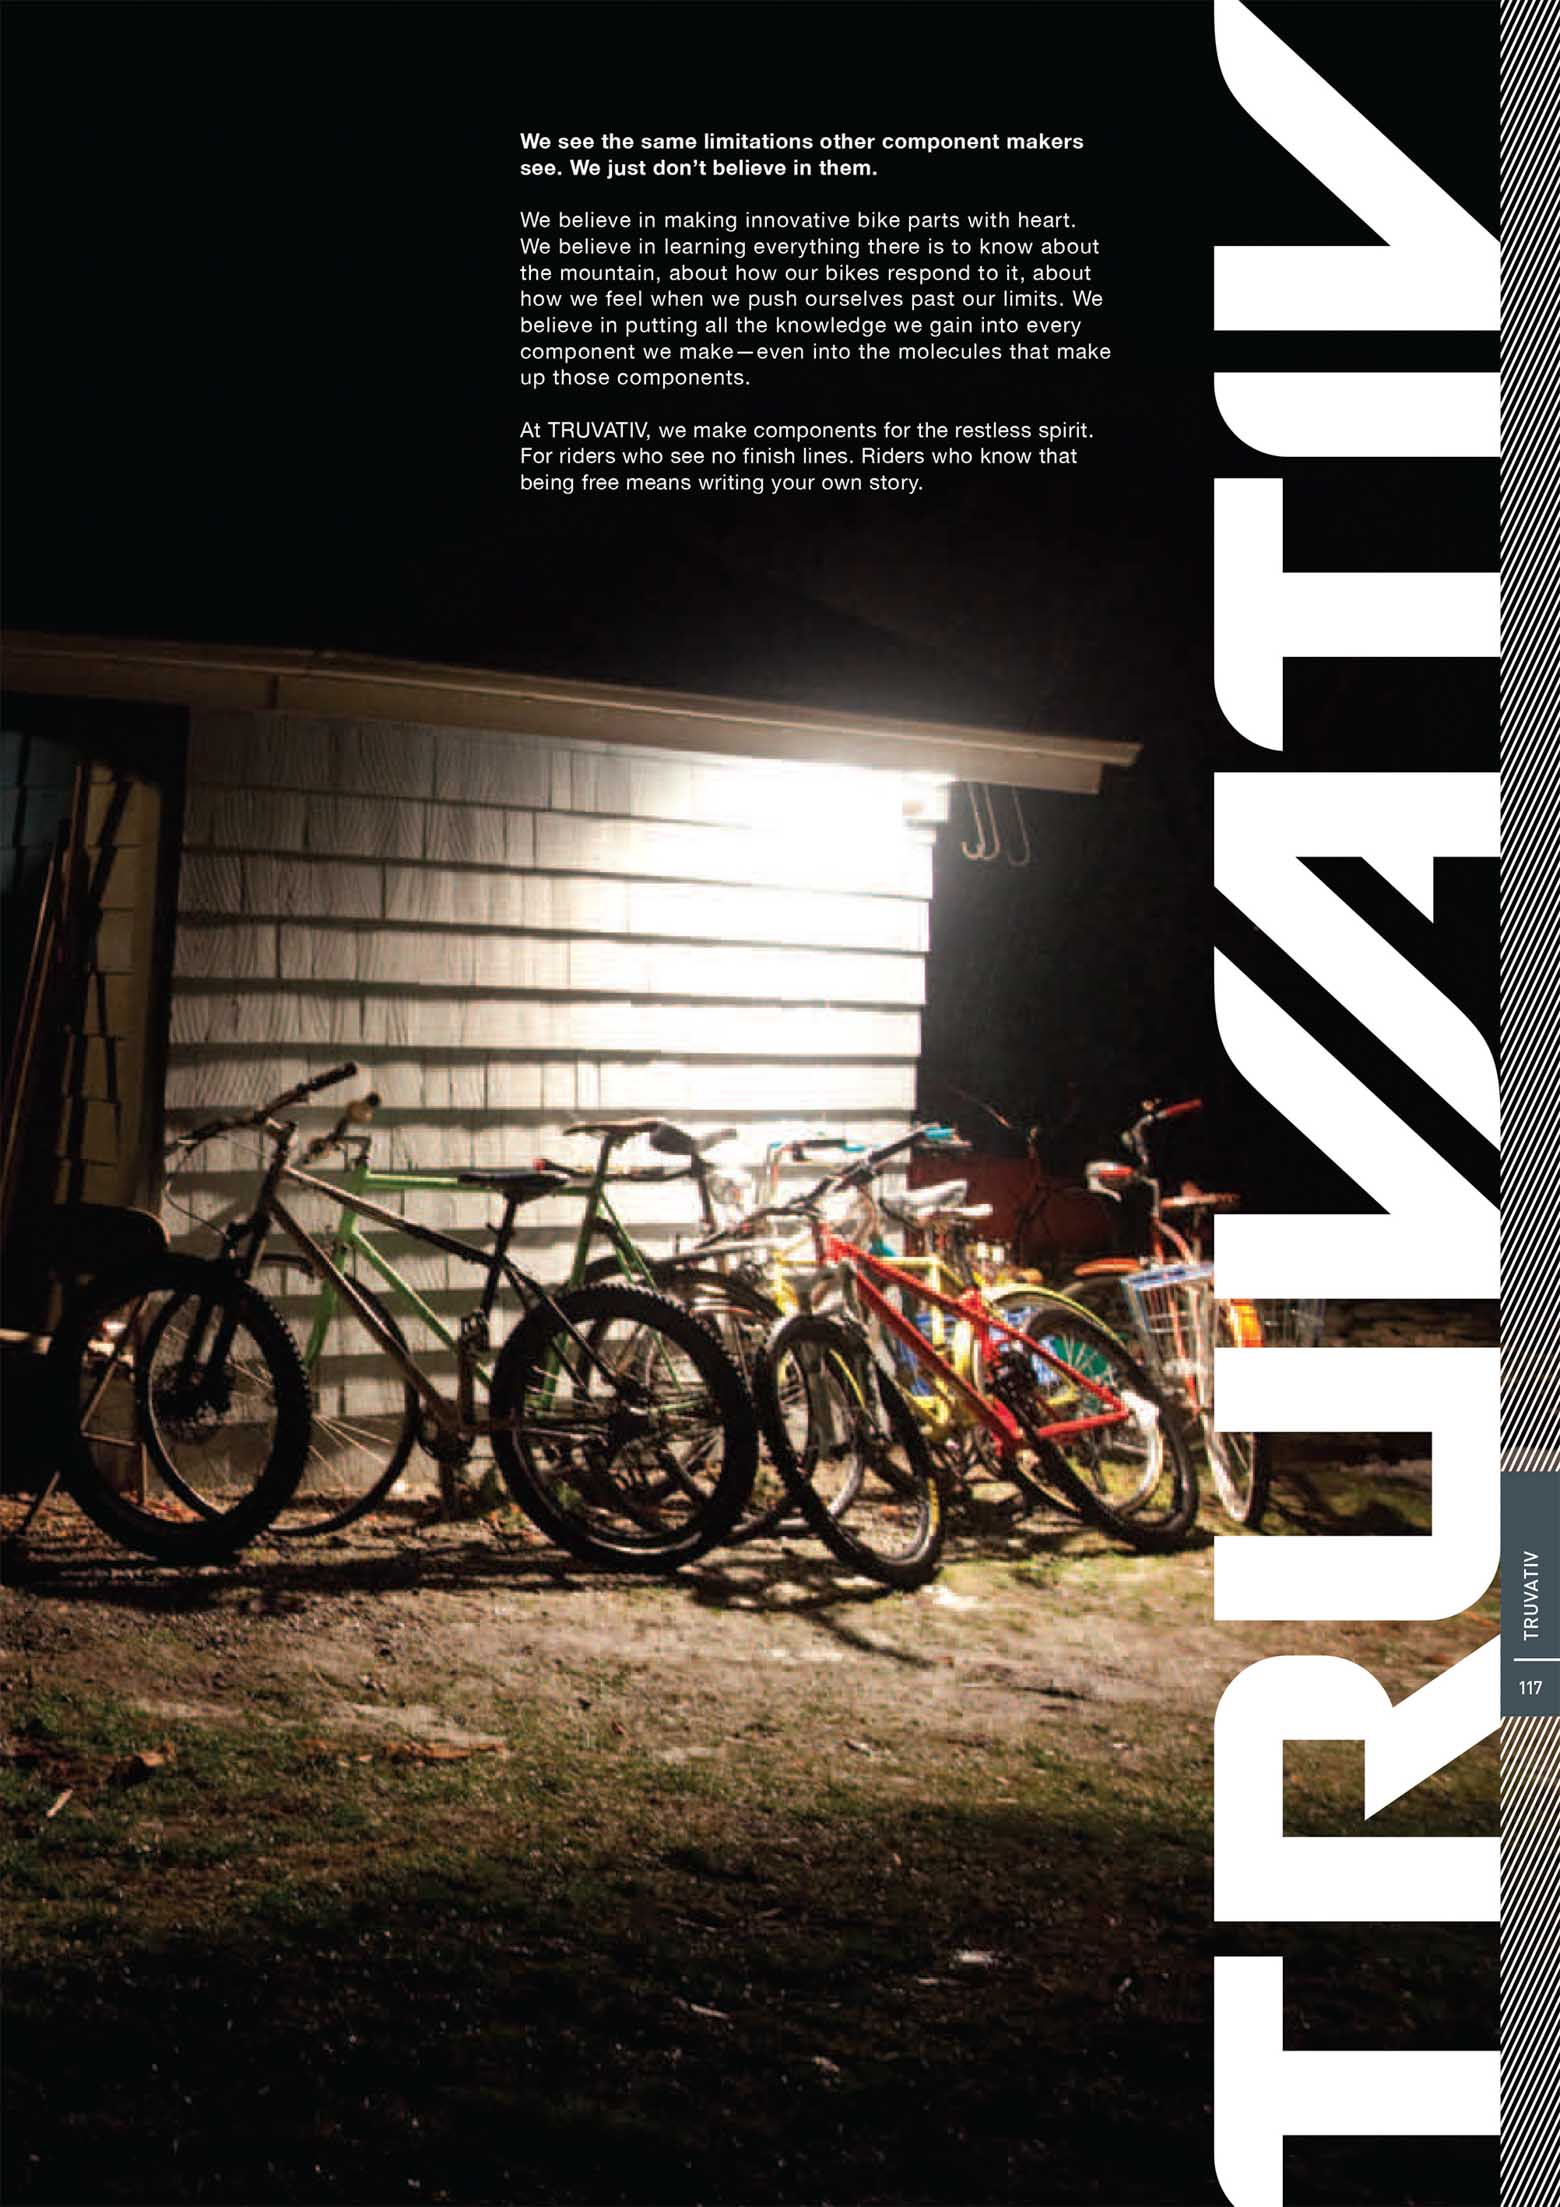 SRAM 2012 Product Collections page 117 main image